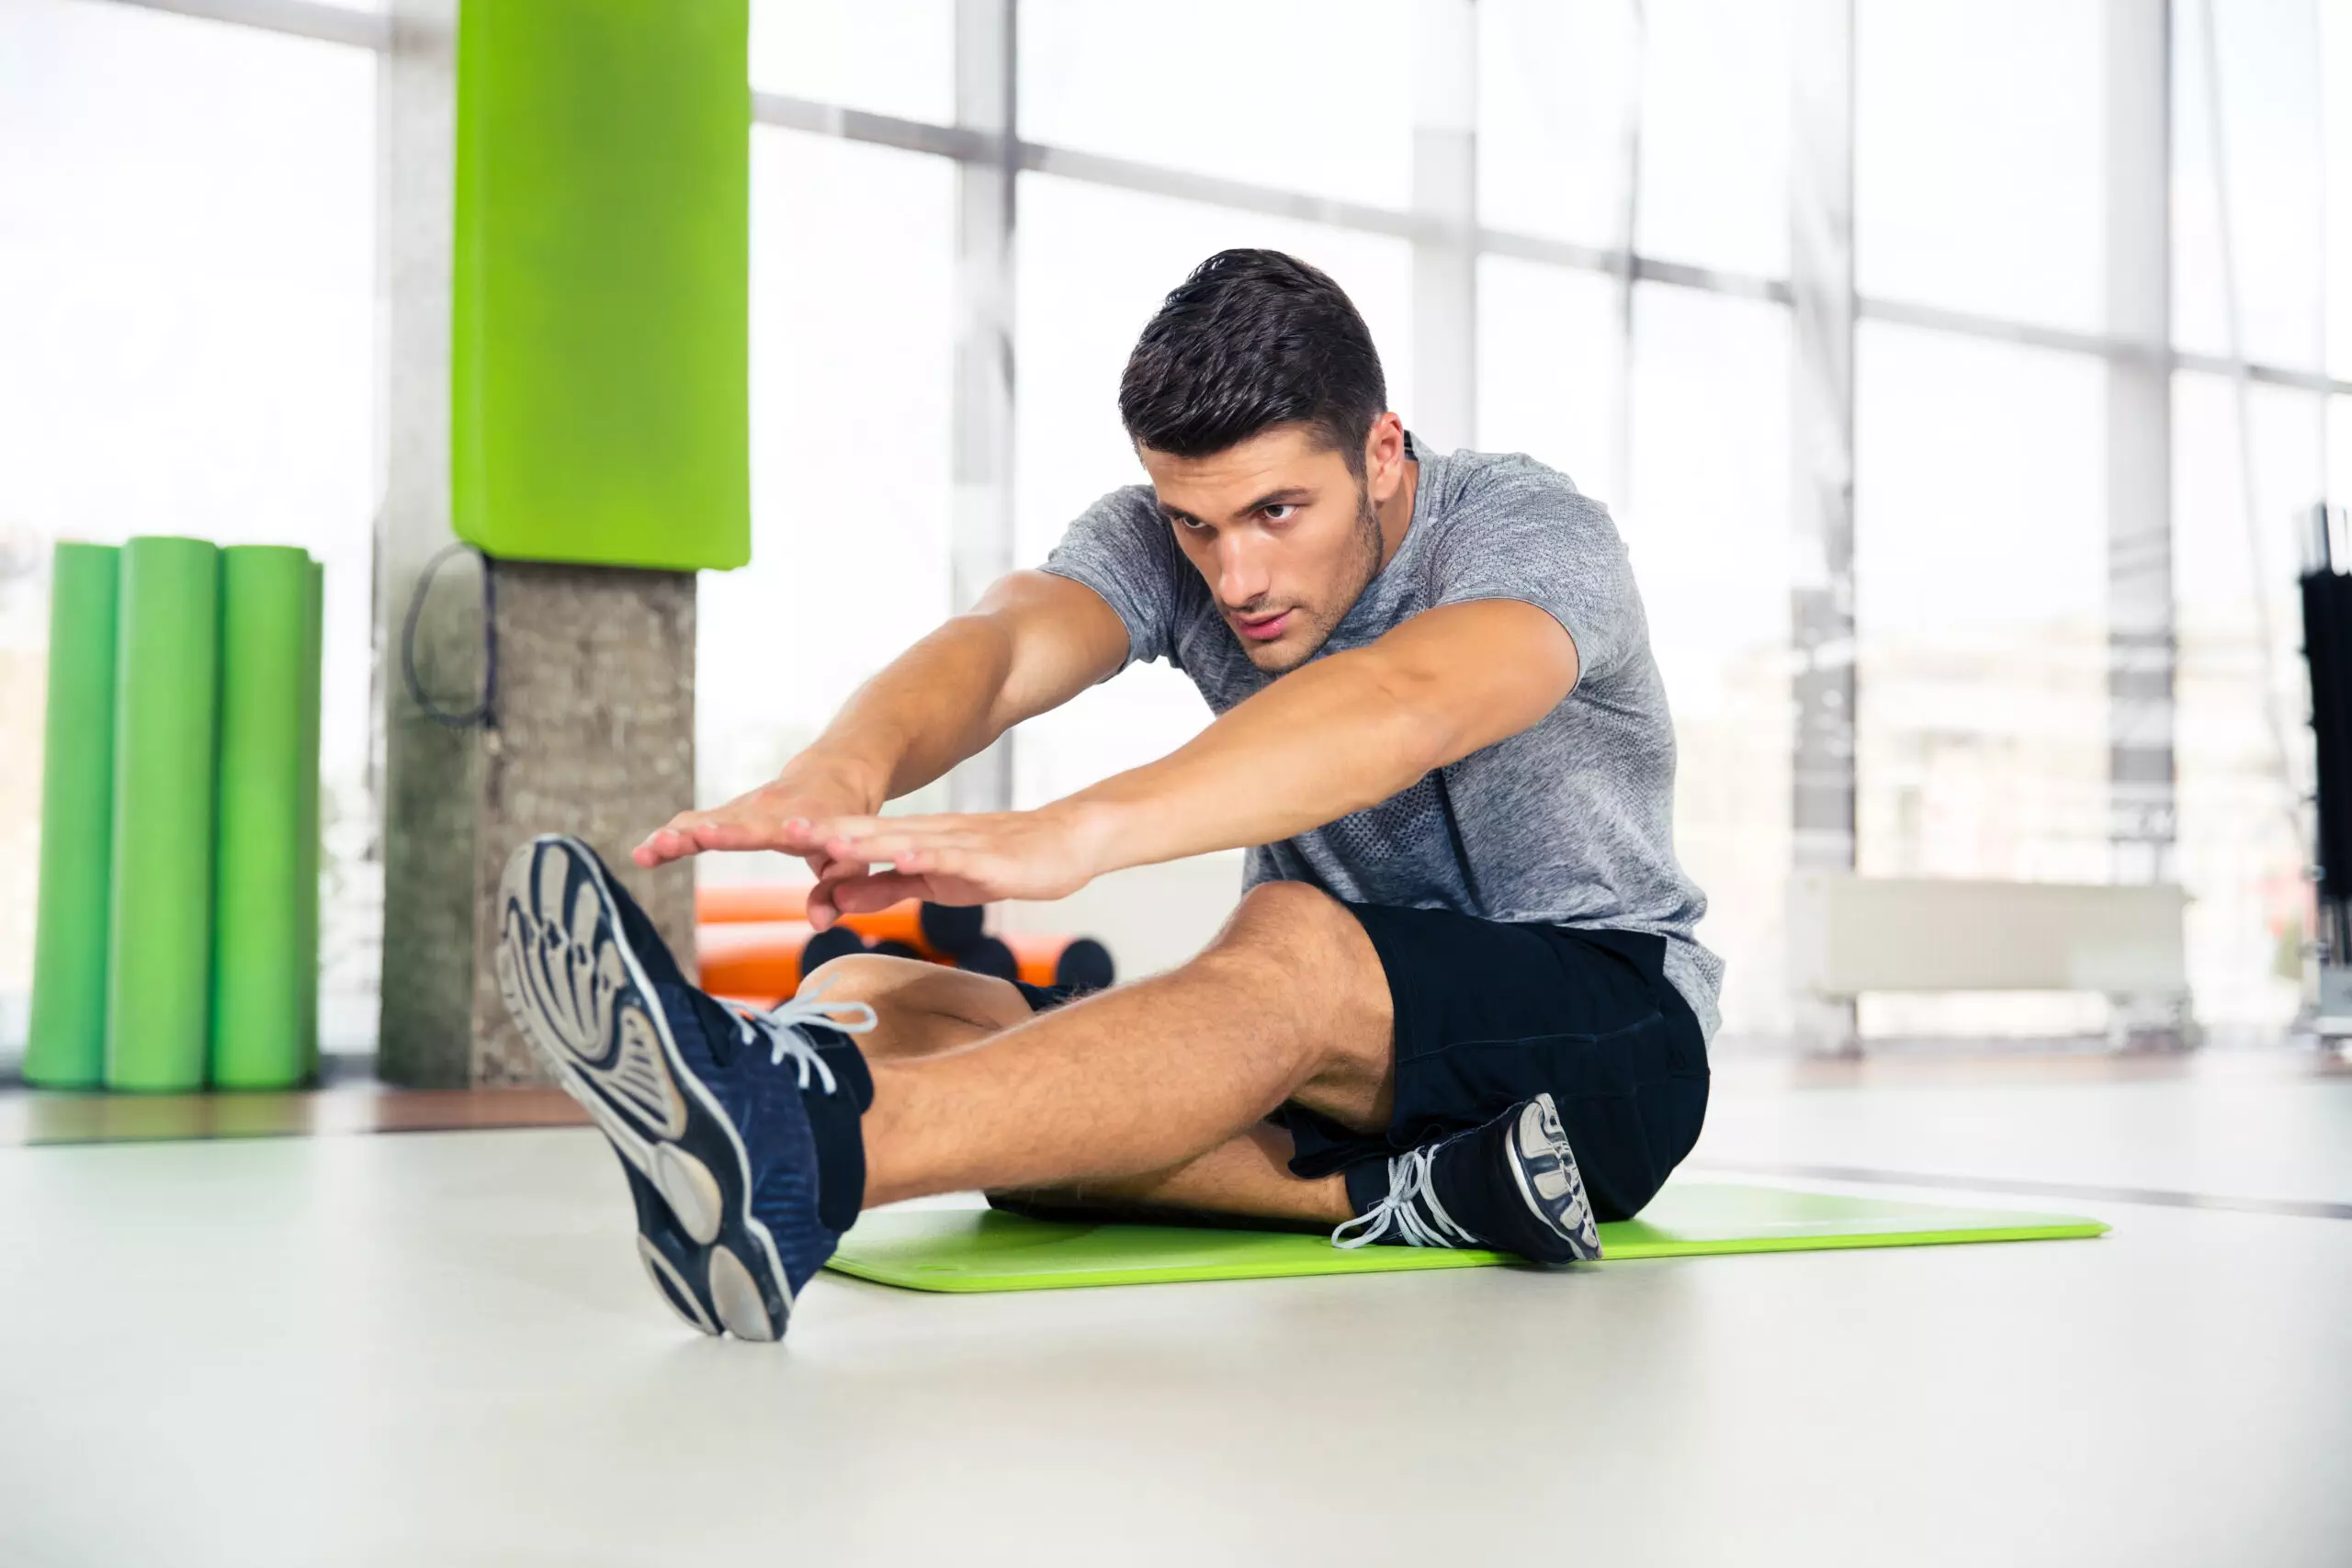 Man stretching on a gym mat indoors